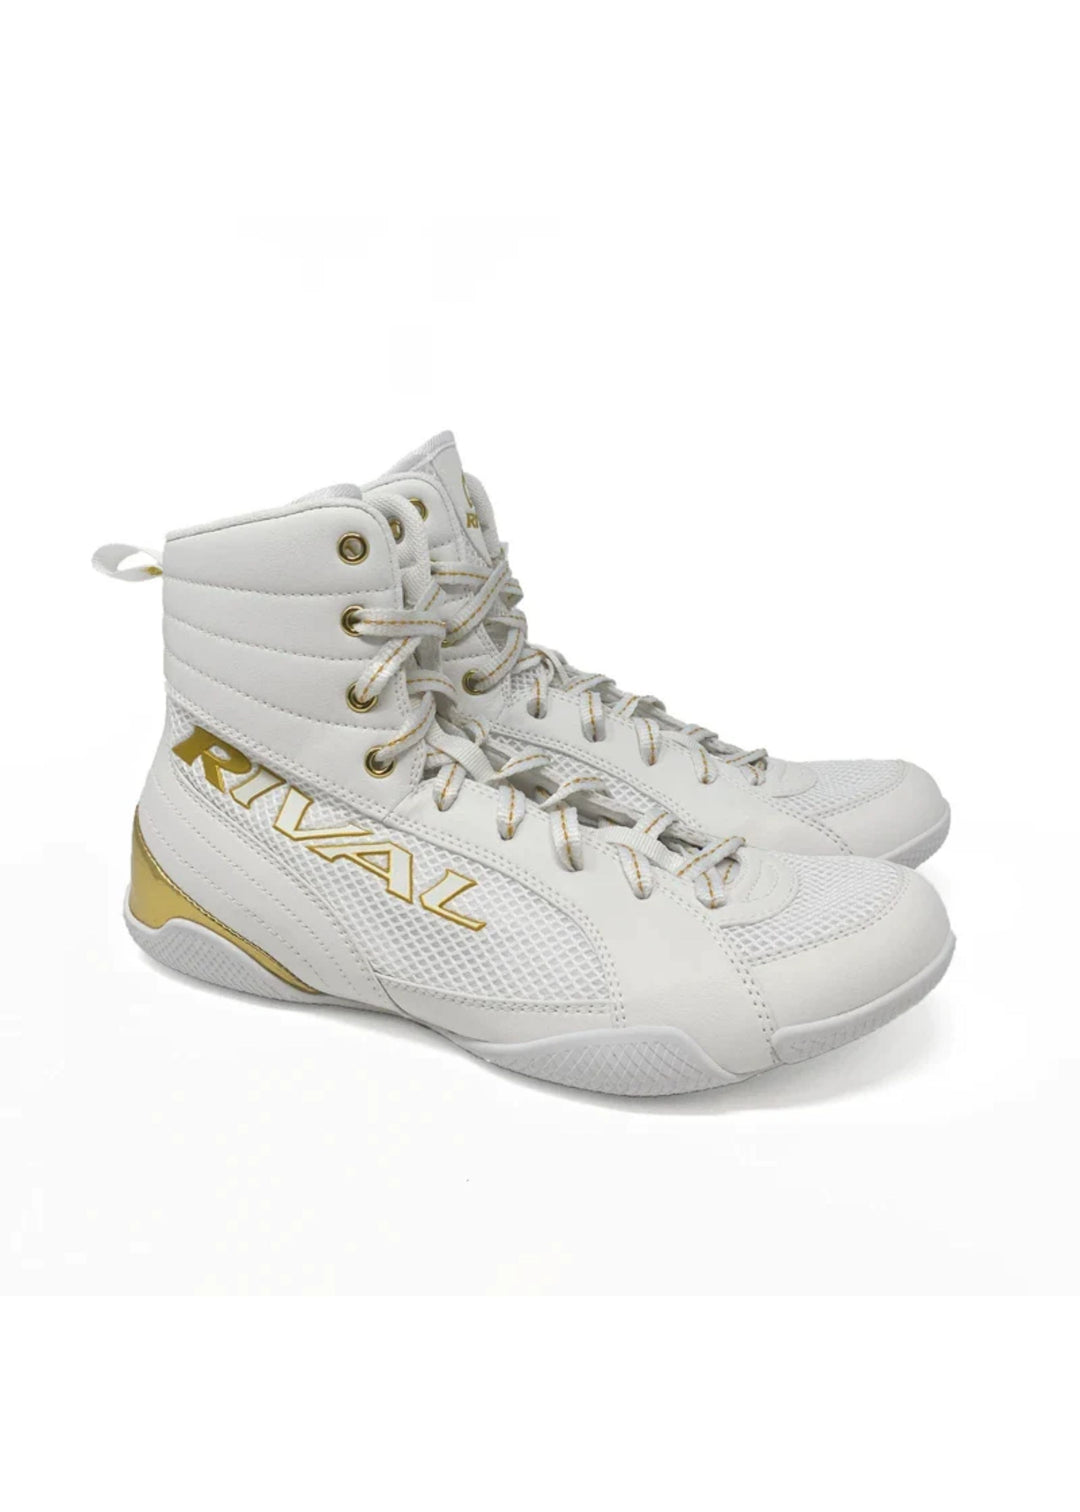 RIVAL RSX-GUERRERO DELUXE BOXING BOOTS - White/Gold